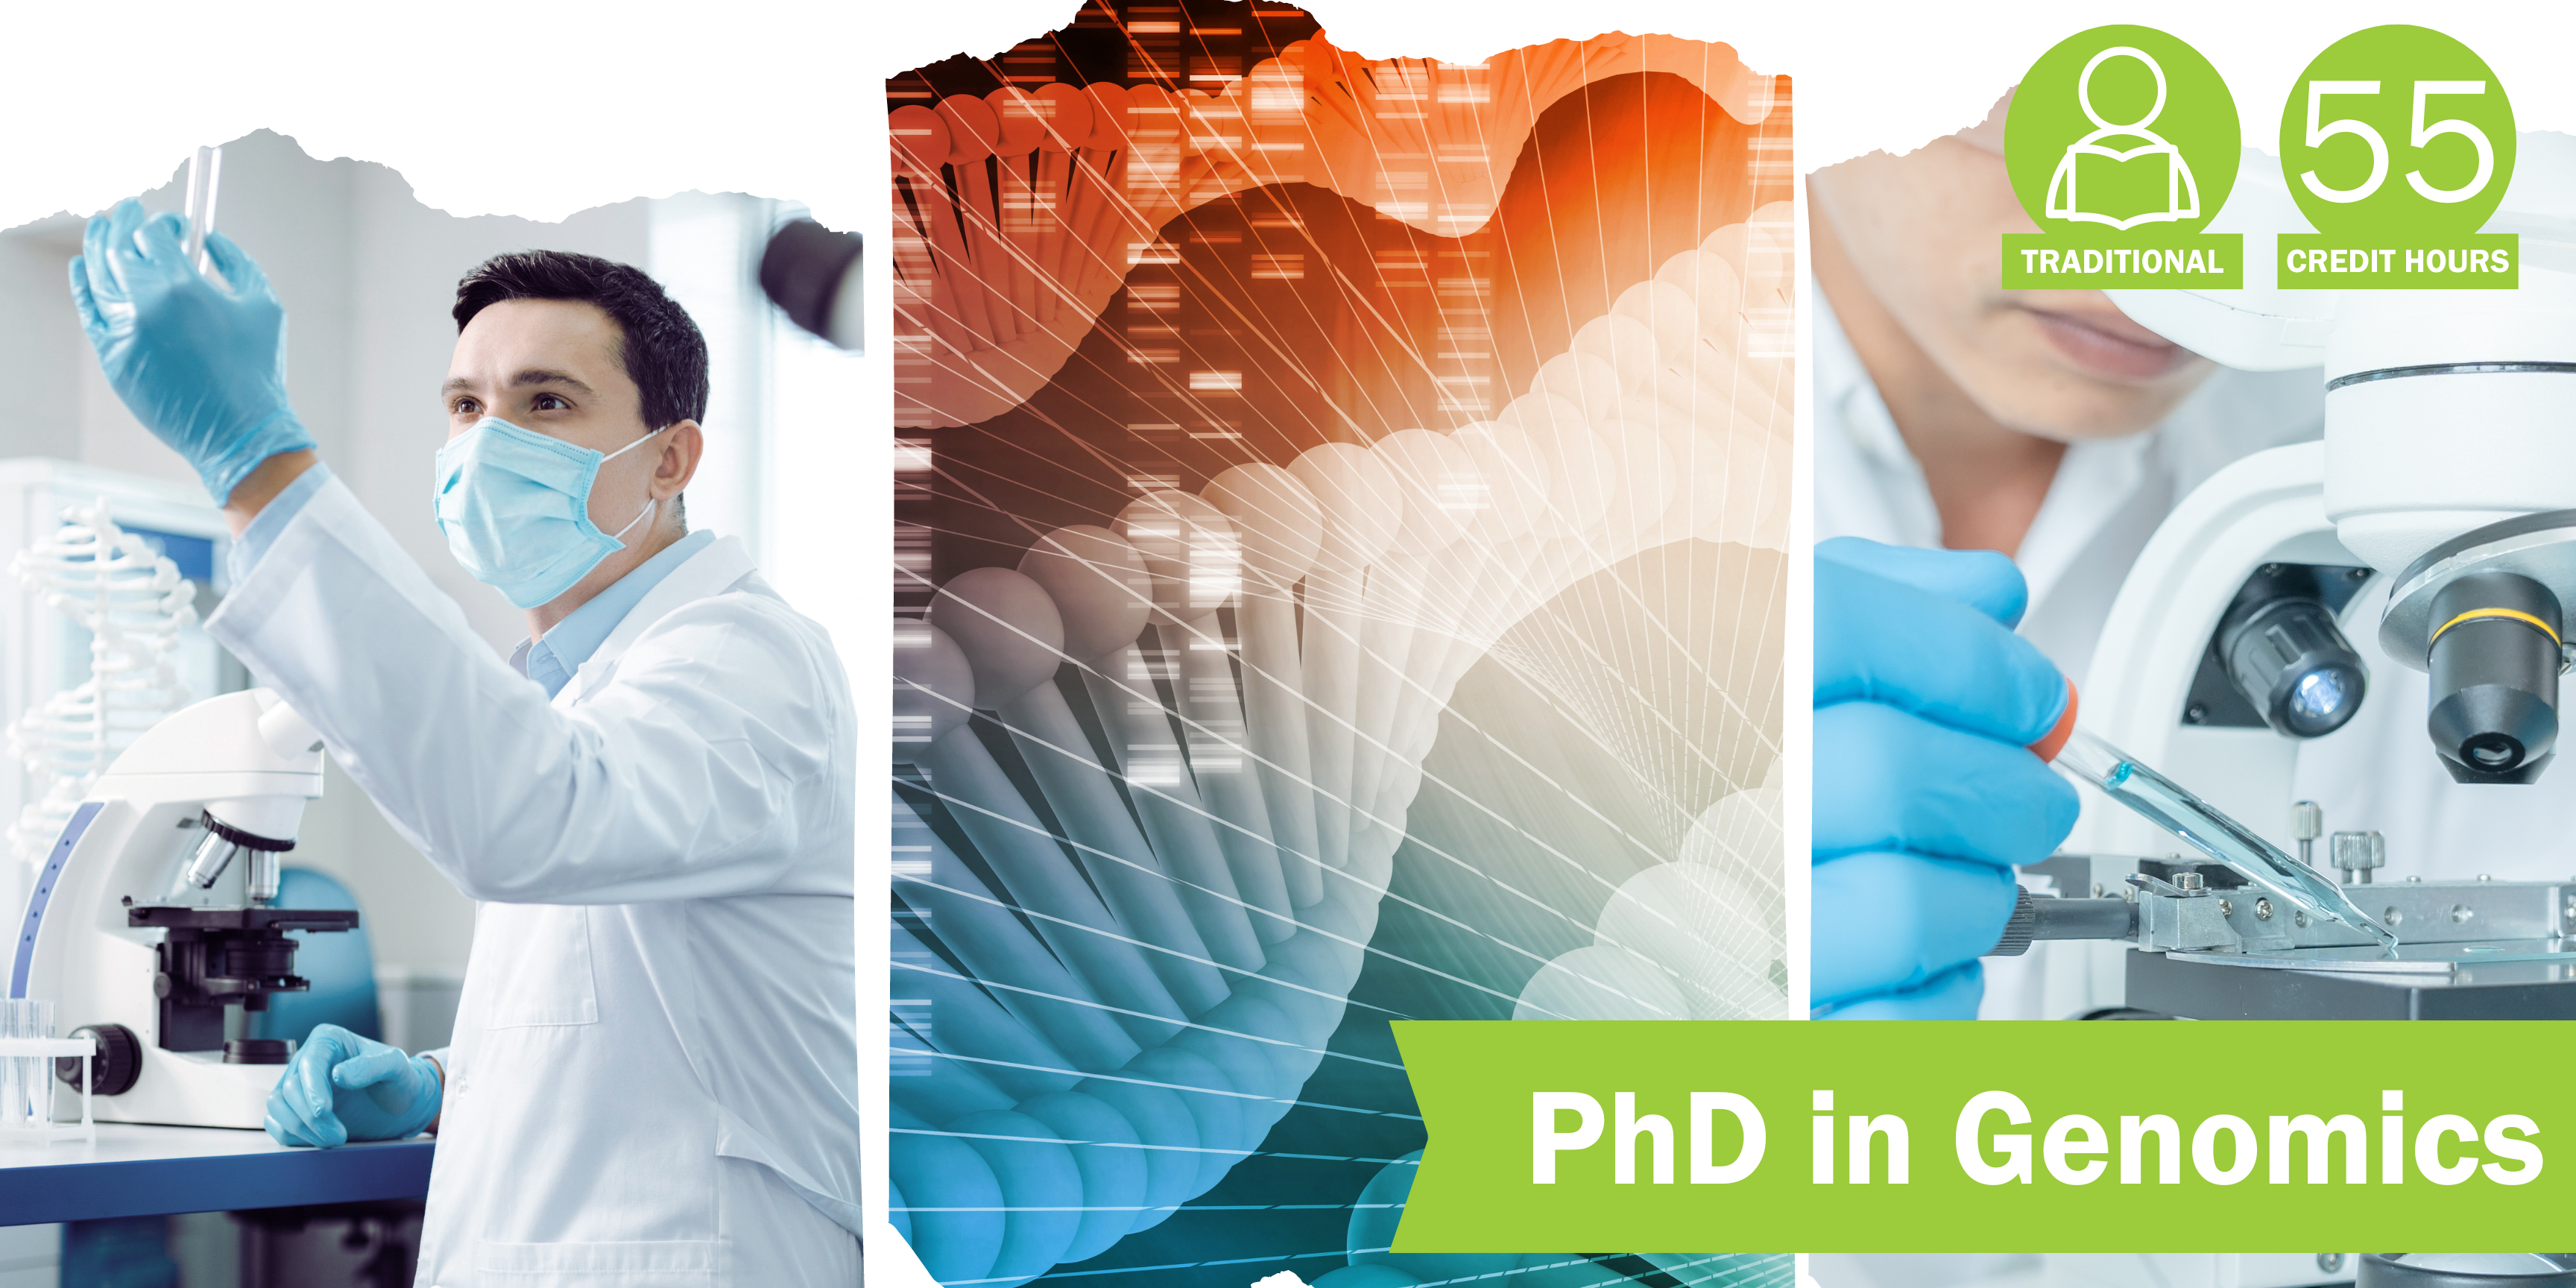 PhD in Genomics - 55 credit hours, traditional course format